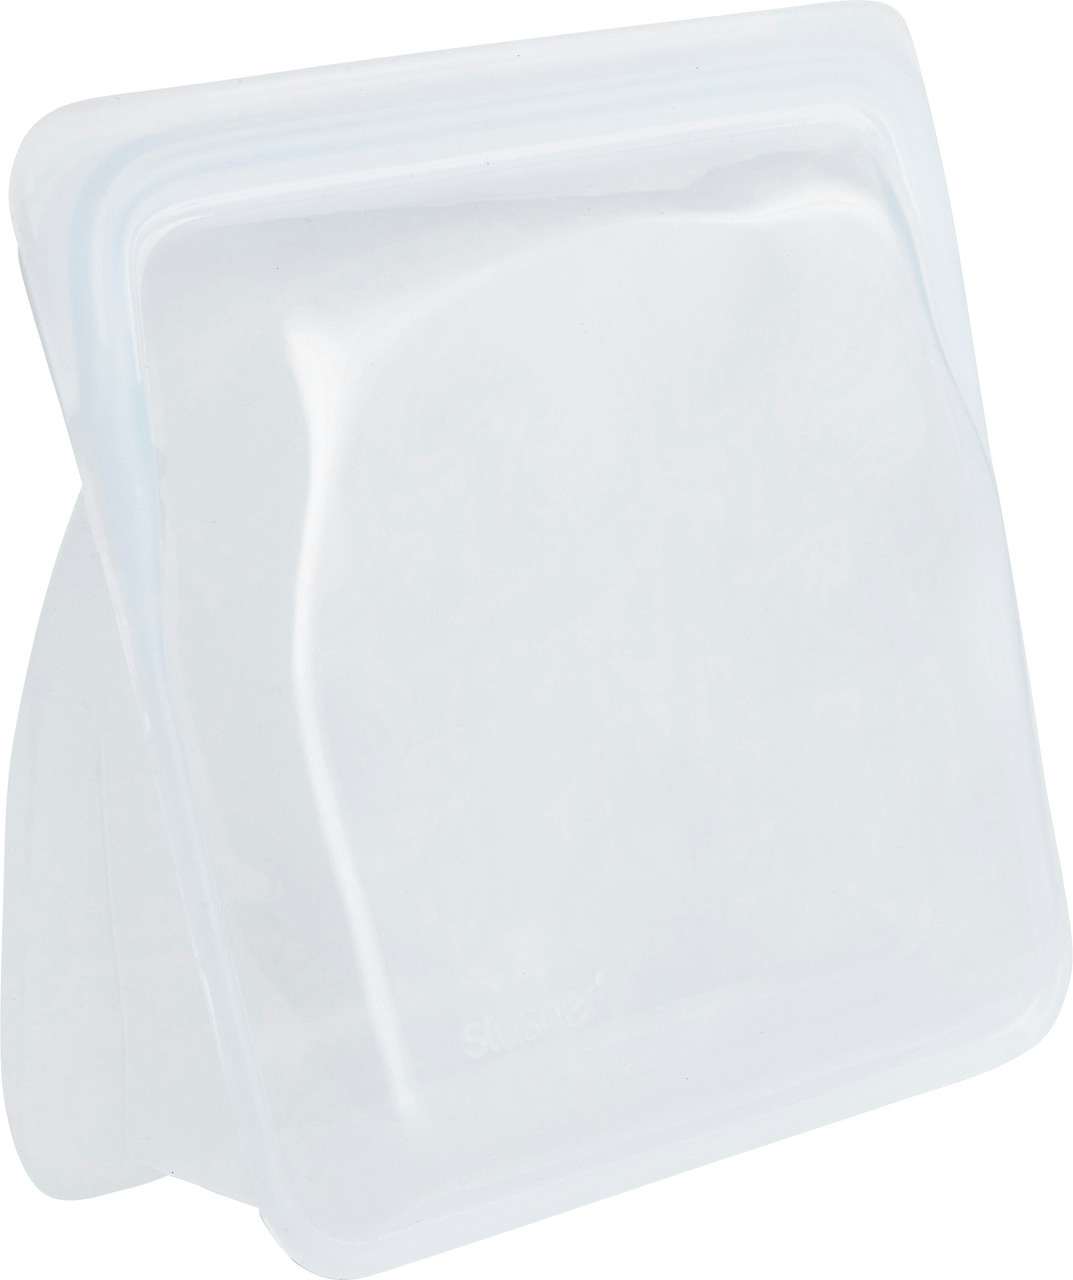 Reusable Stand Up Bag Clear